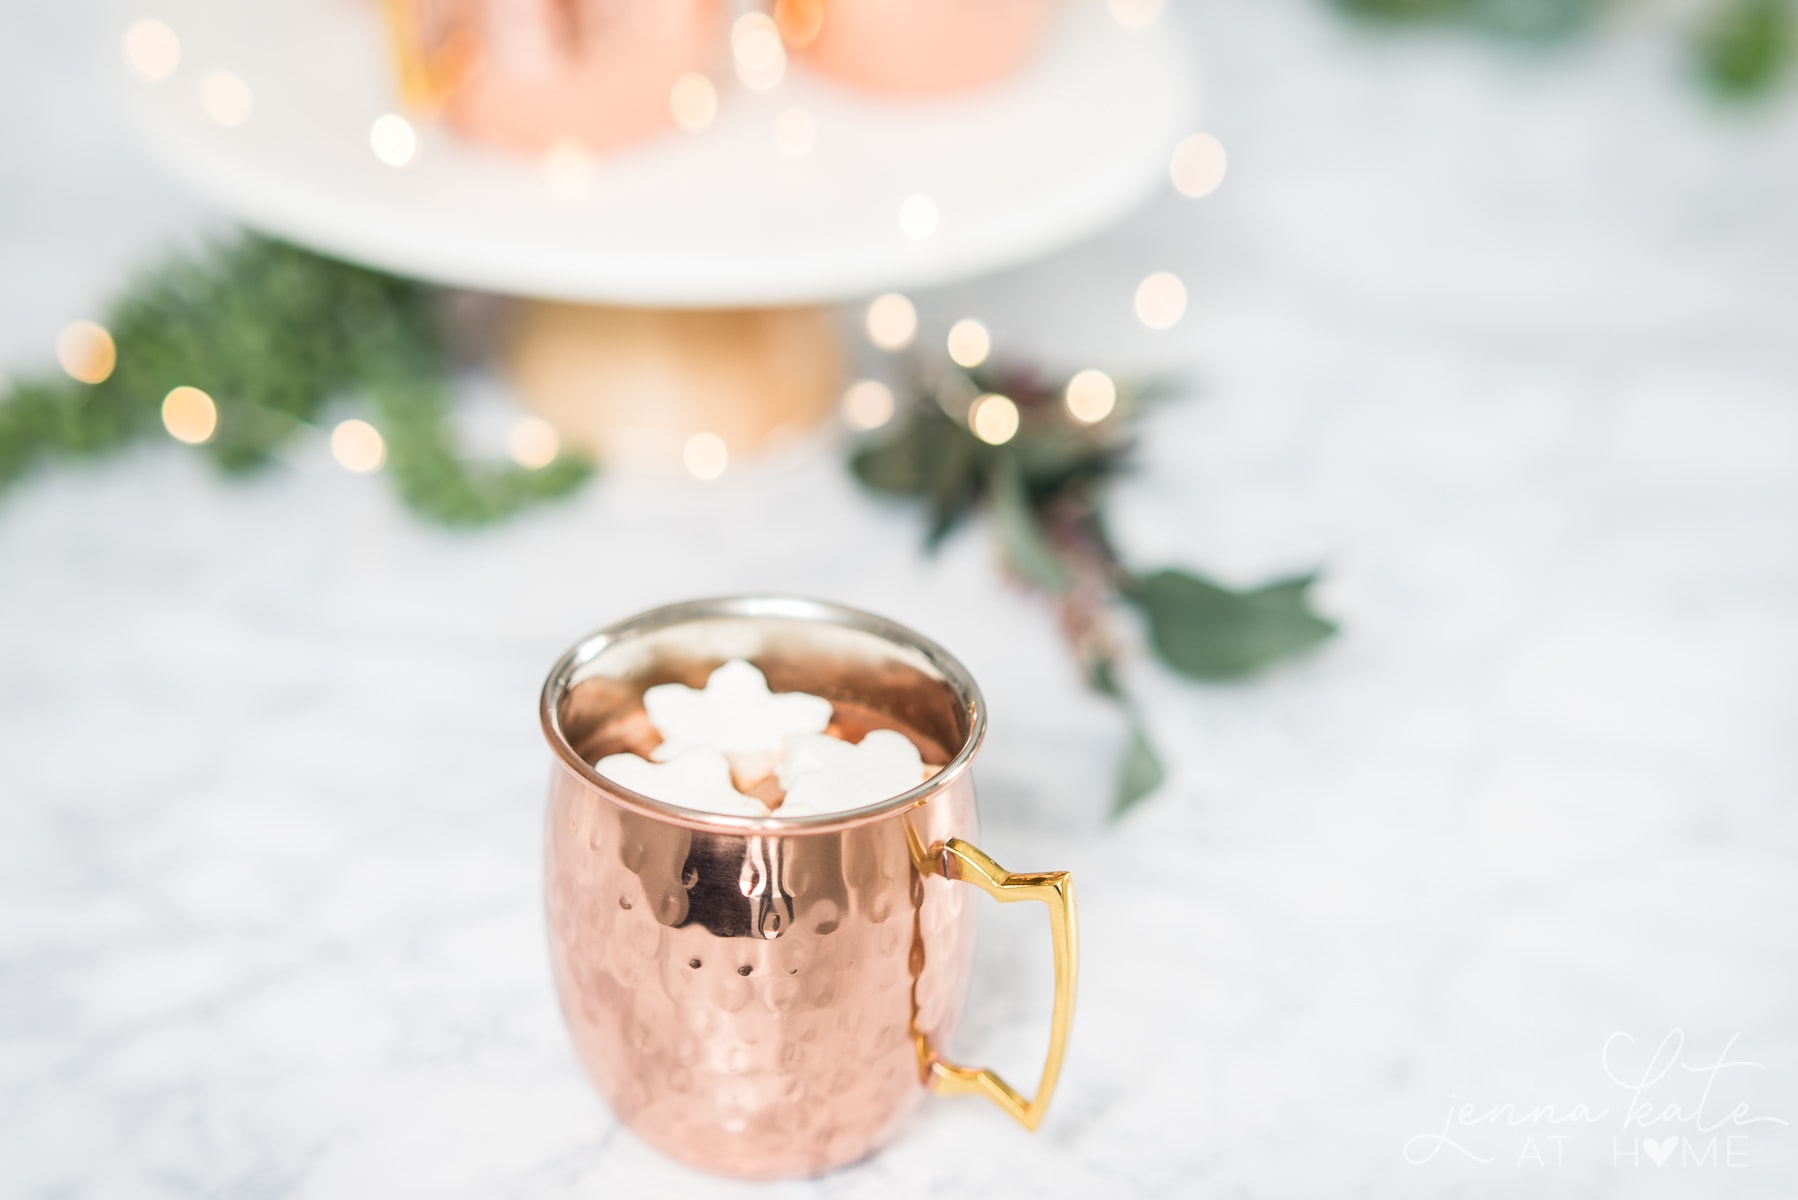 This homemade hot chocolate is made with only three ingredients and requires no cocoa powder, just real chocoloate!